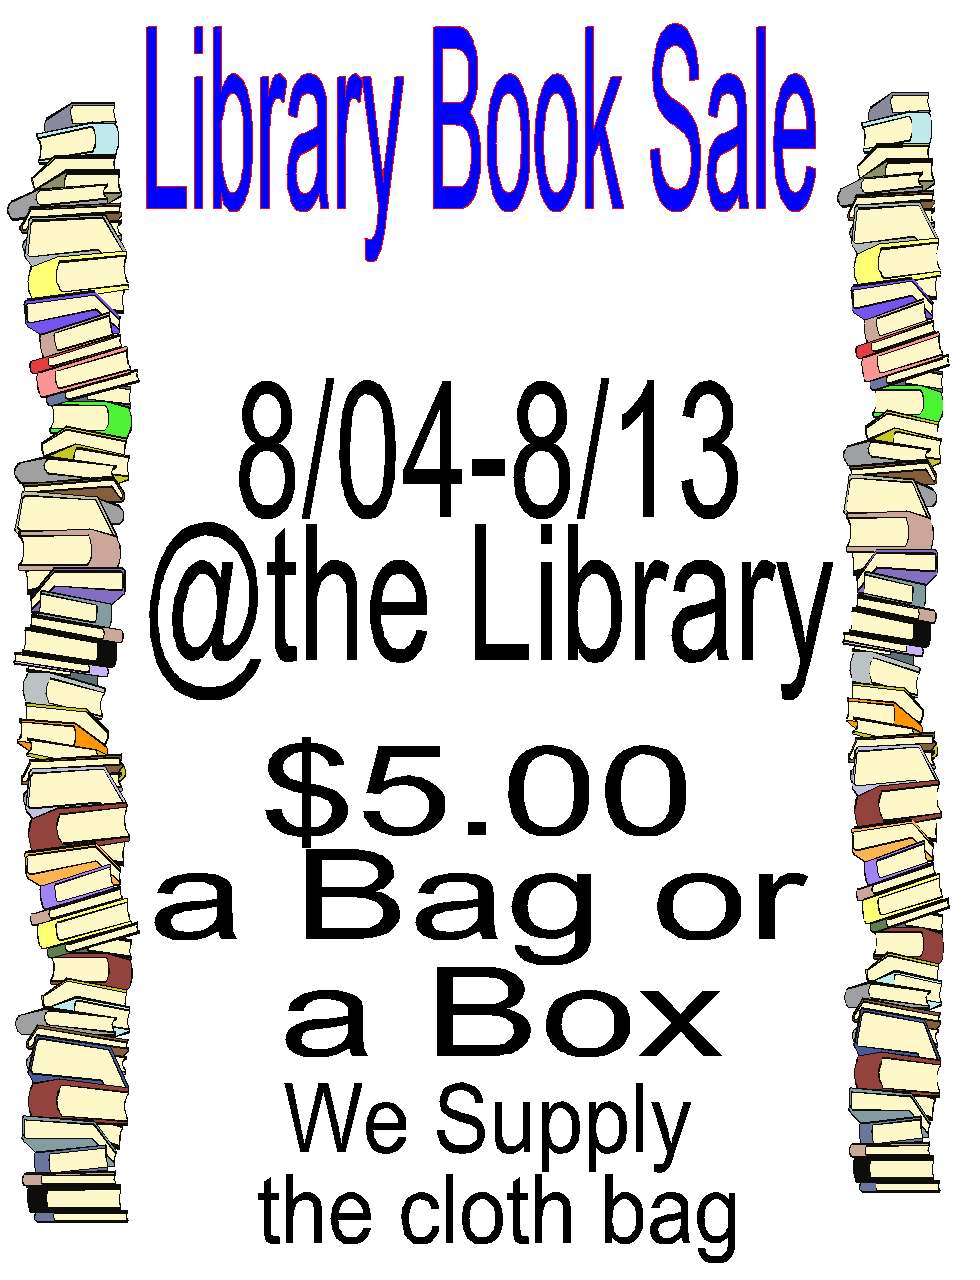 Eddy-New Rockford Library: Library Used Book Sale